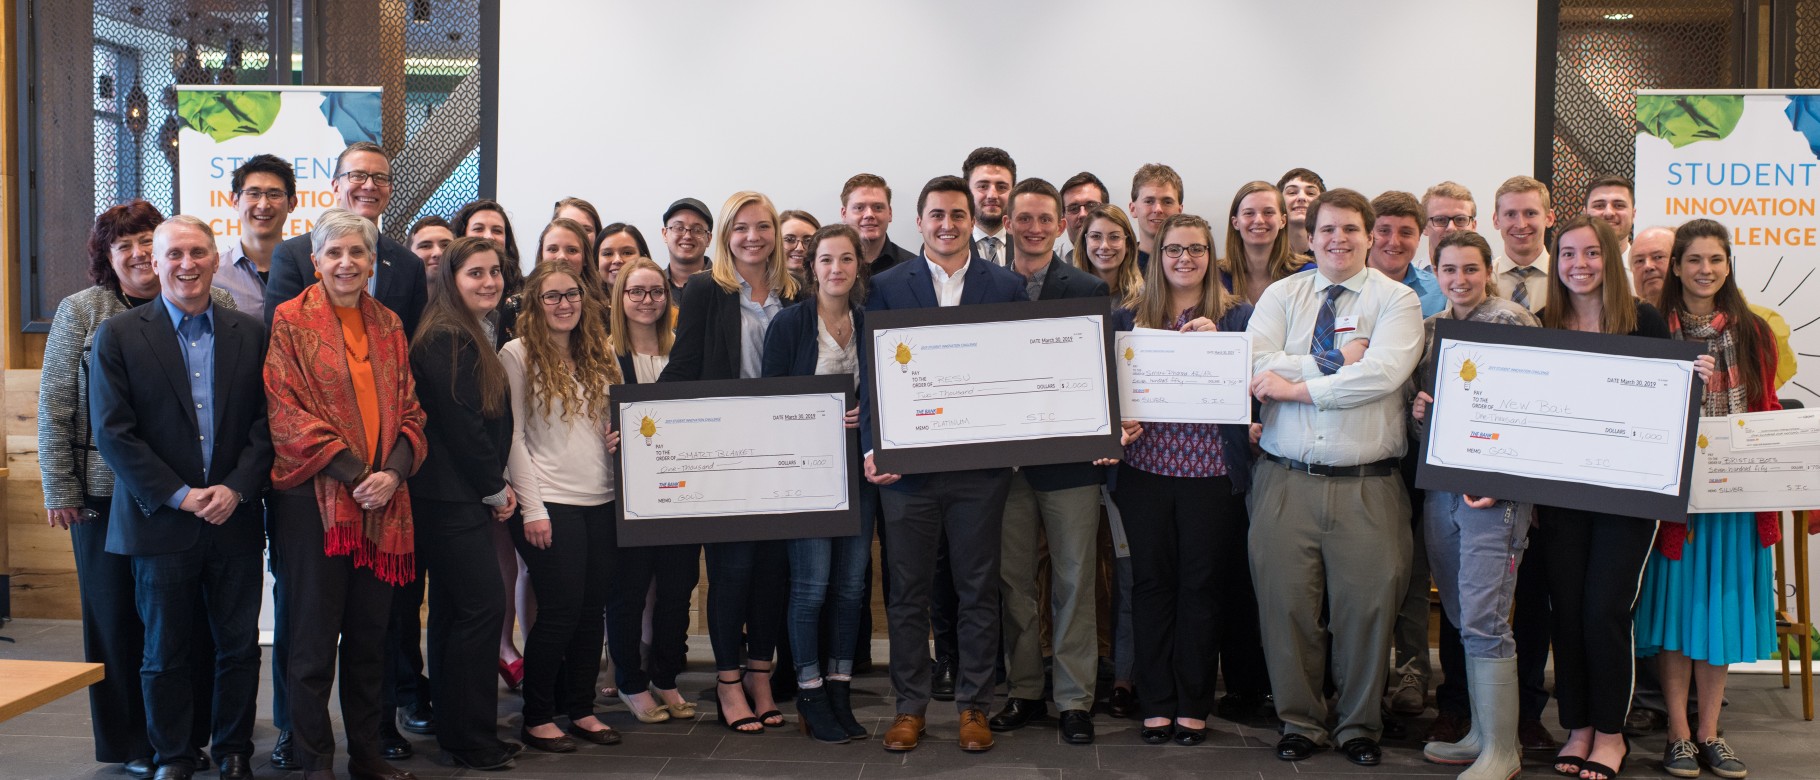 Nearly twenty teams showcased their innovative prototypes during the 2019 Student Innovation Challenge